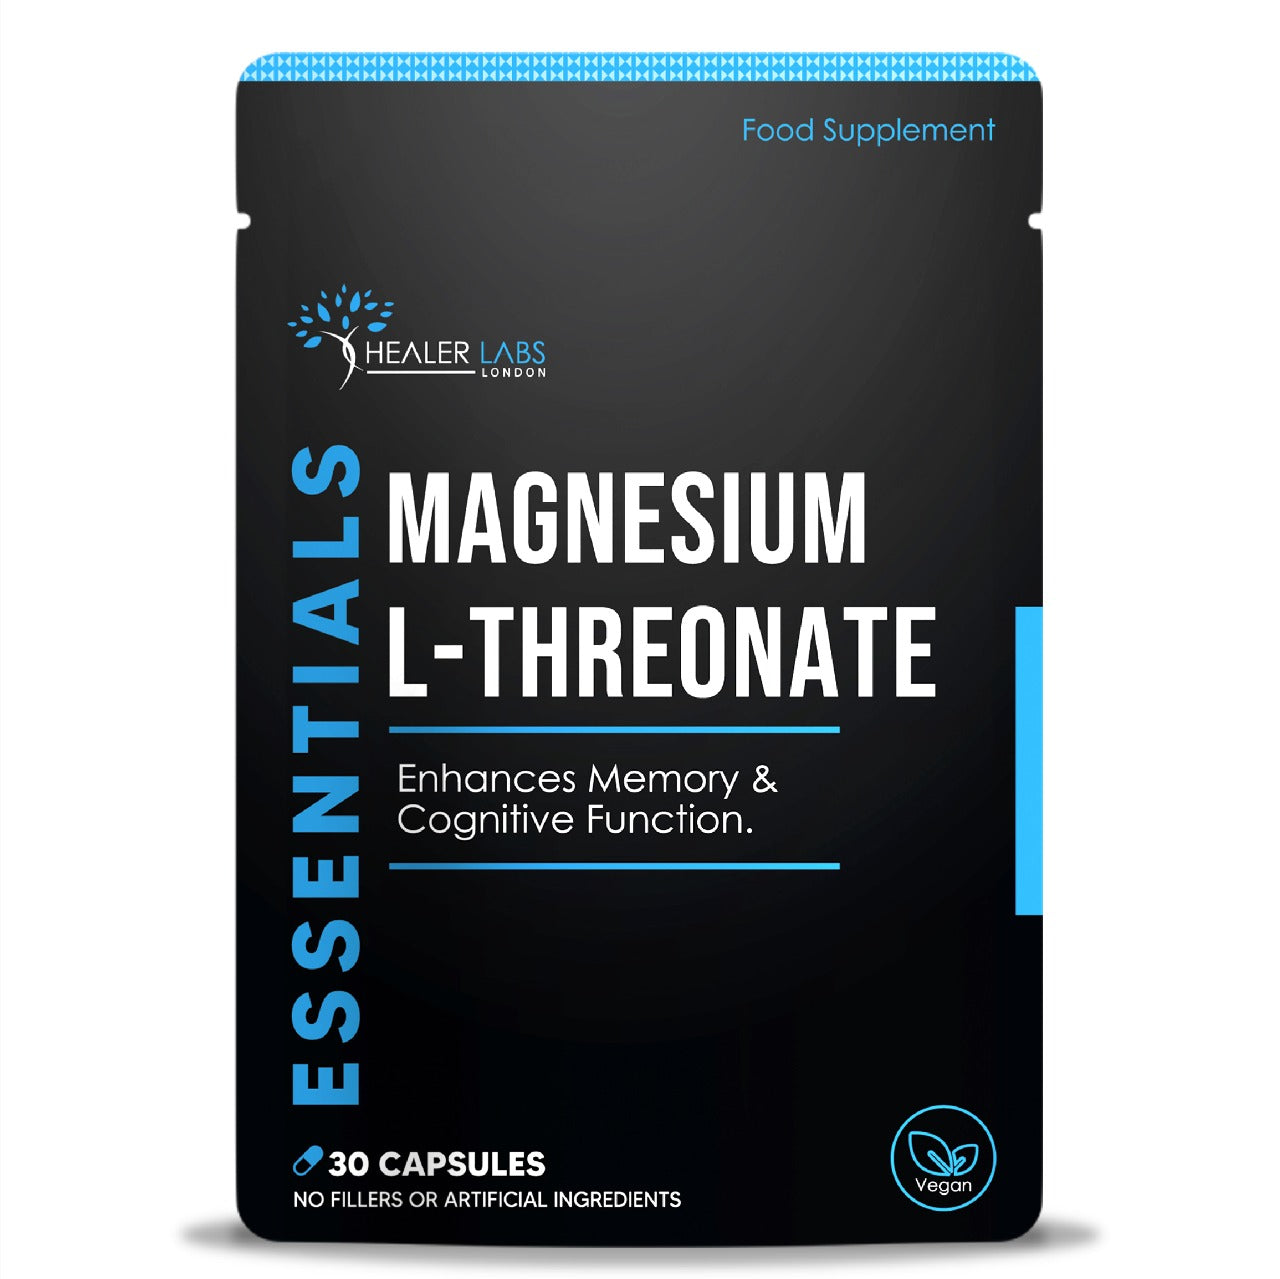  Healer Labs - Magnesium L-Threonate - The Beauty Corp.